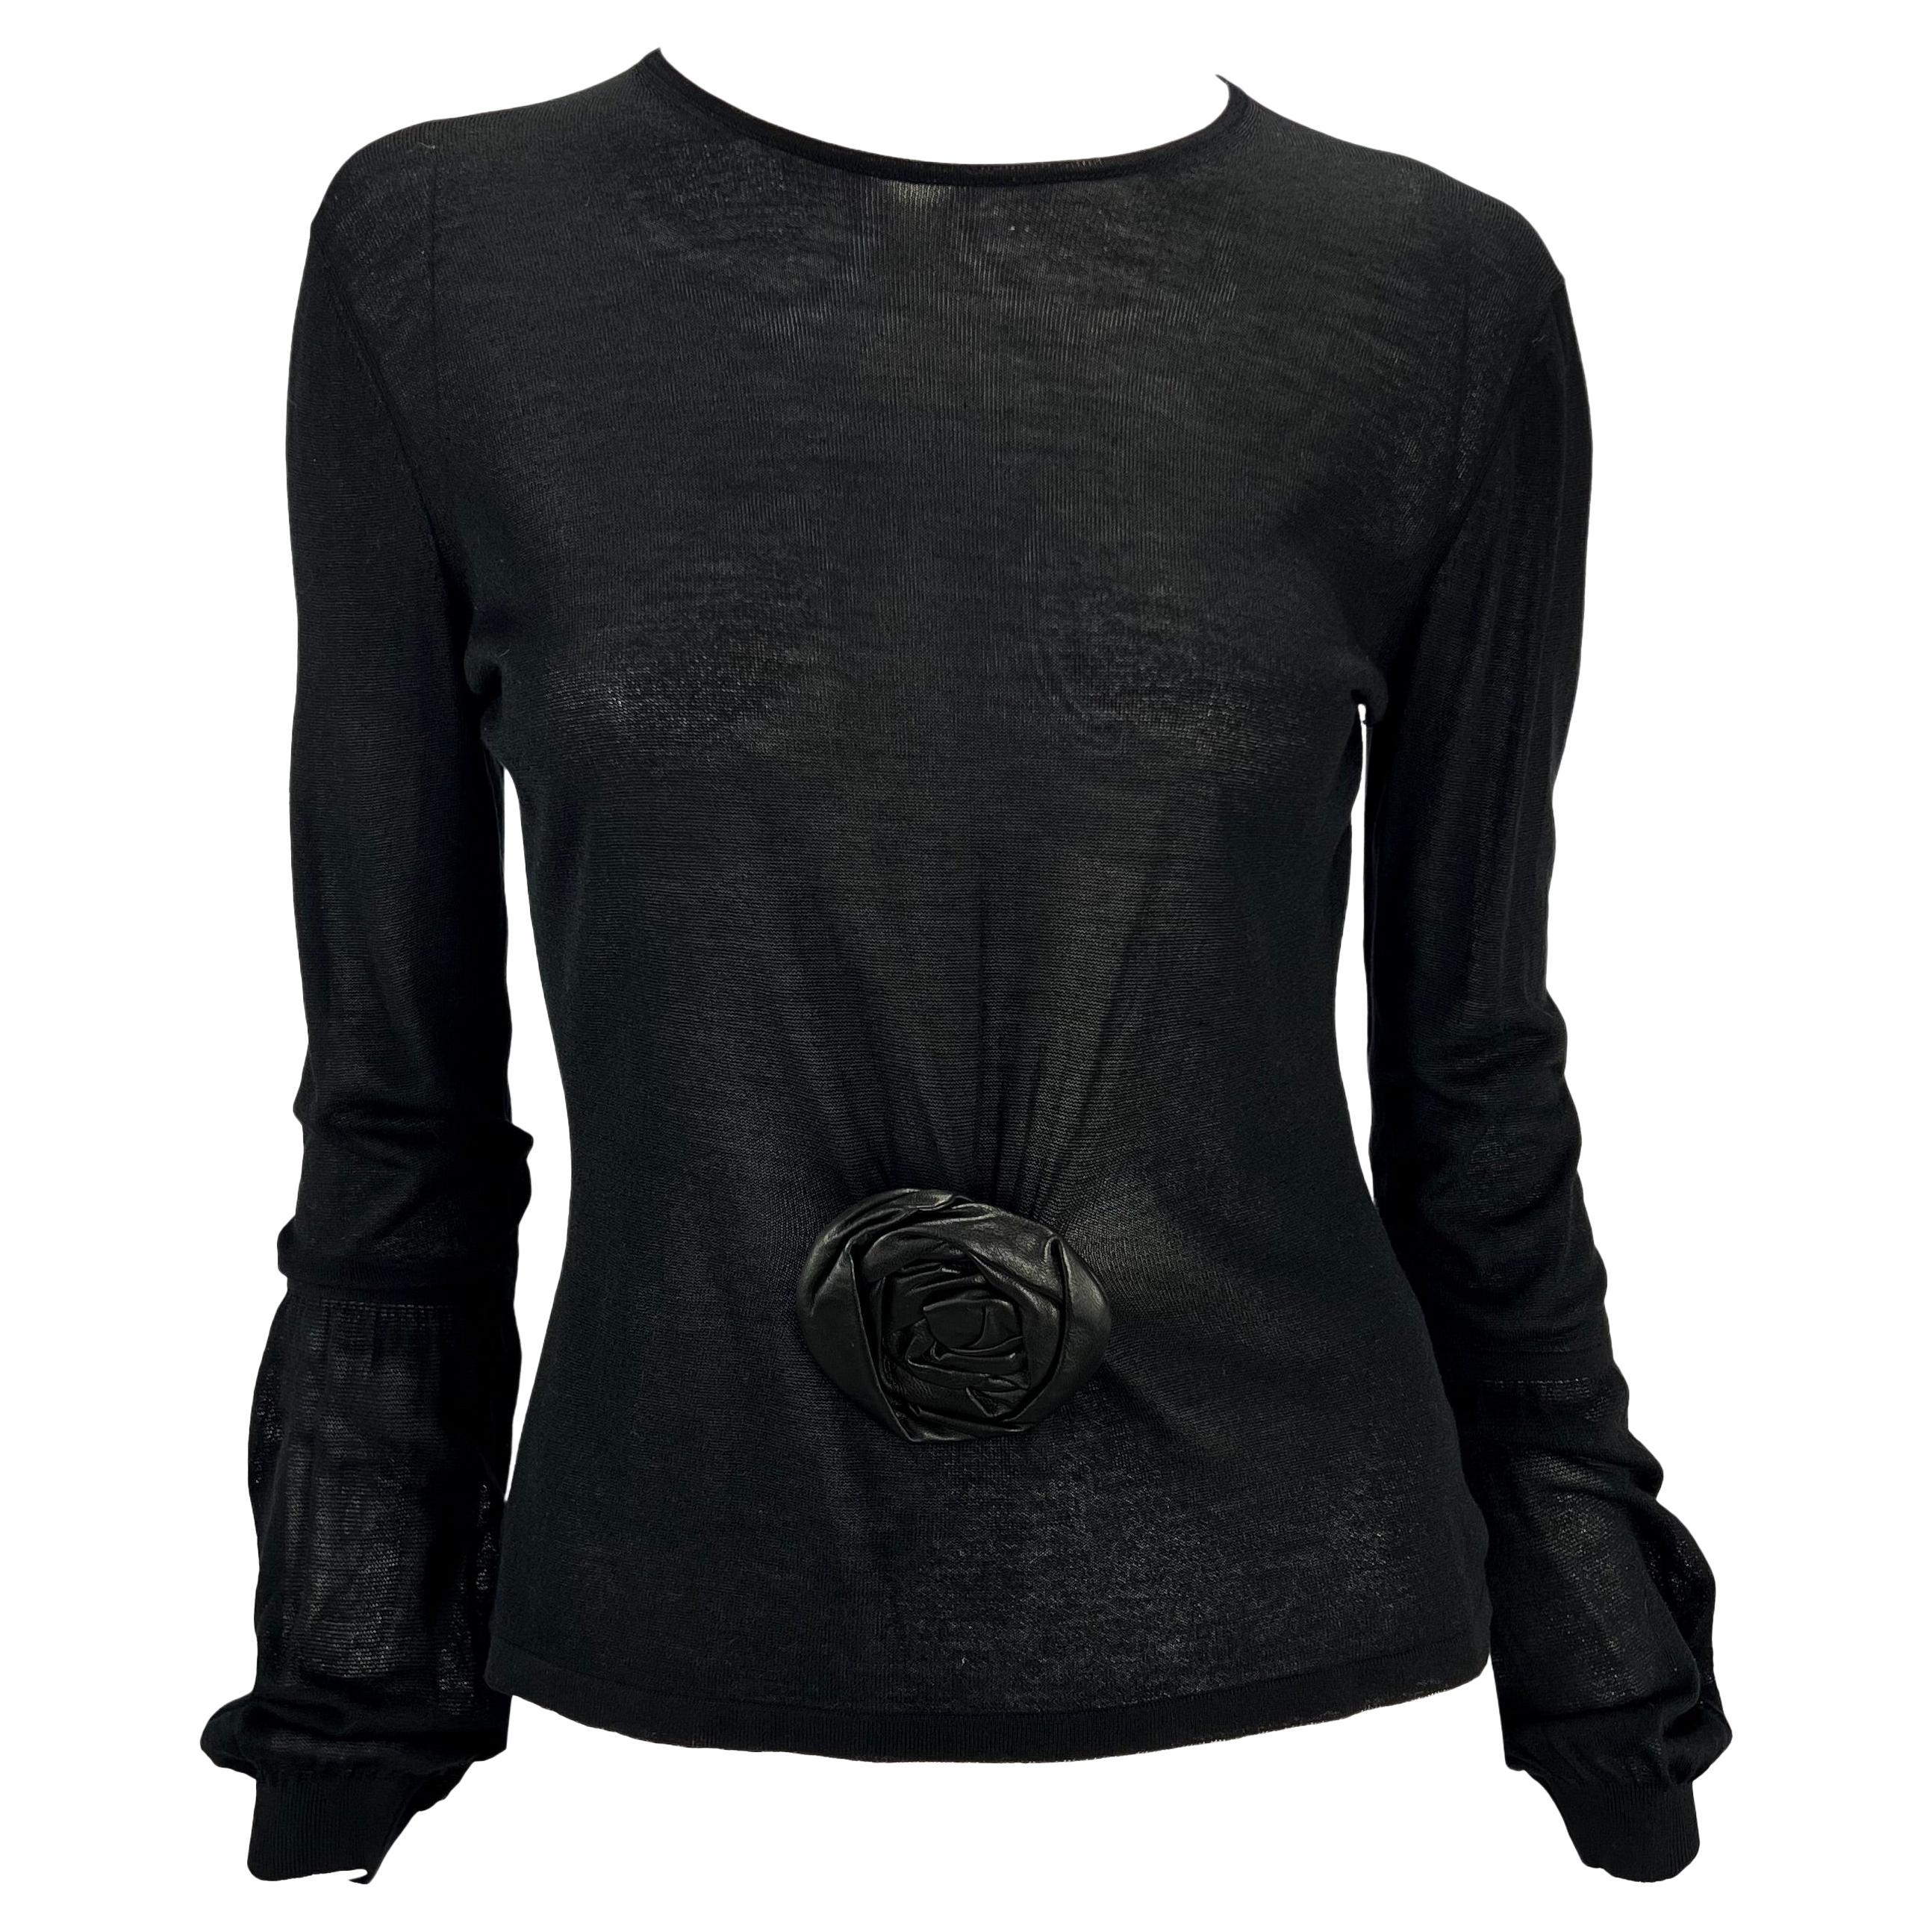 F/W 1999 Gucci by Tom Ford Runway Leather Flower Appliqué Sheer Knit Top For Sale